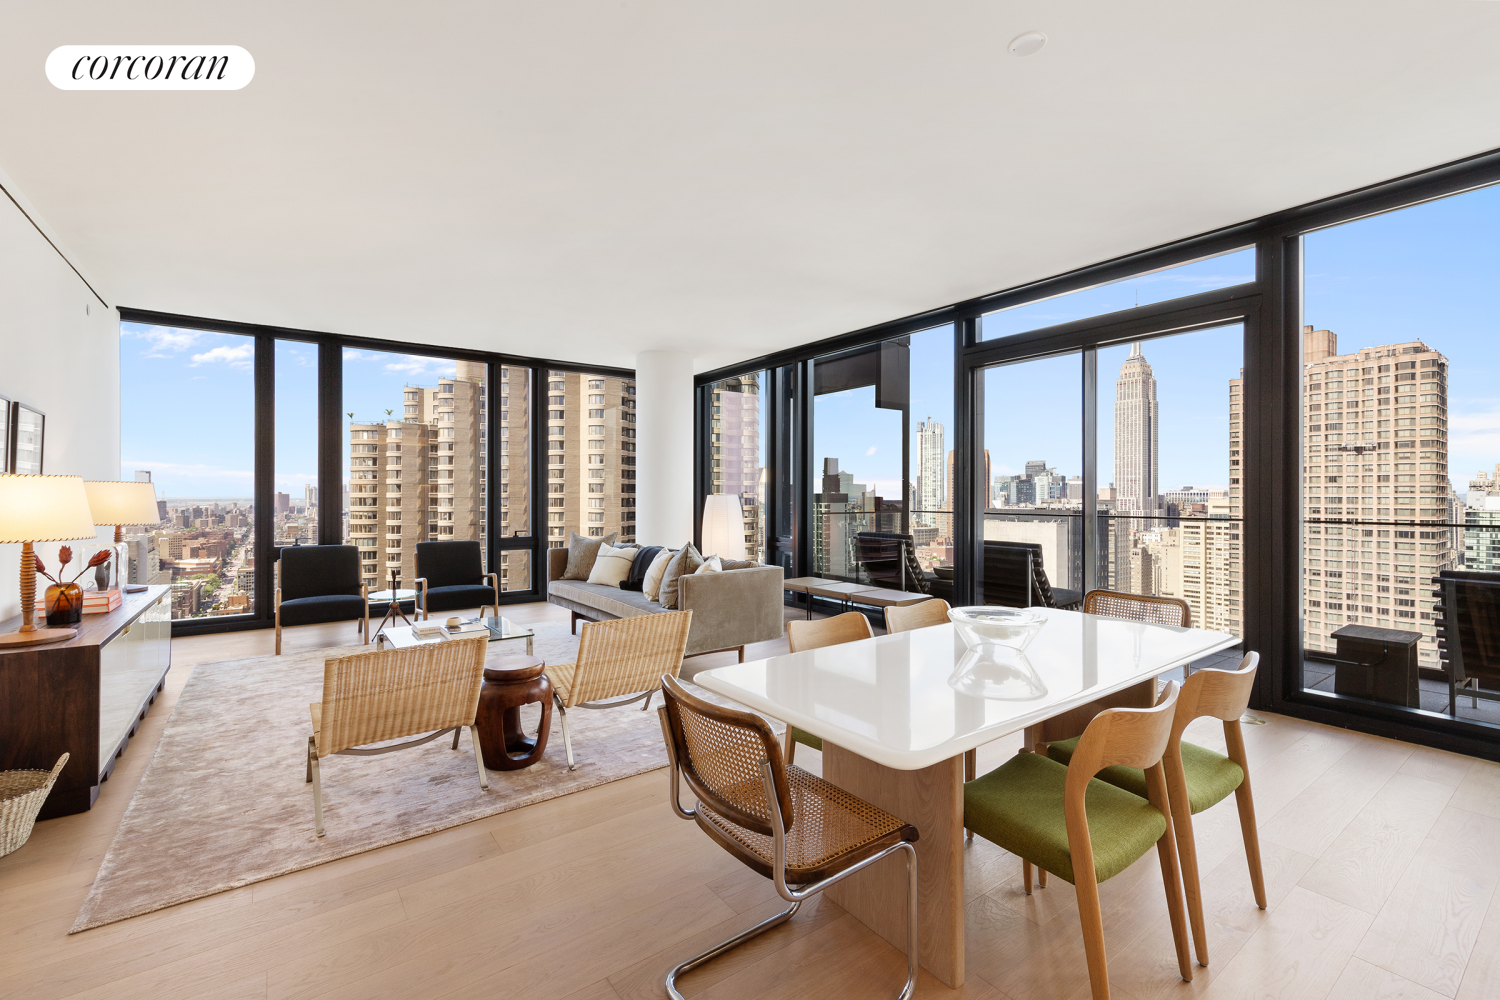 695 1st Avenue 40E, Murray Hill, Midtown East, NYC - 3 Bedrooms  
3.5 Bathrooms  
4 Rooms - 